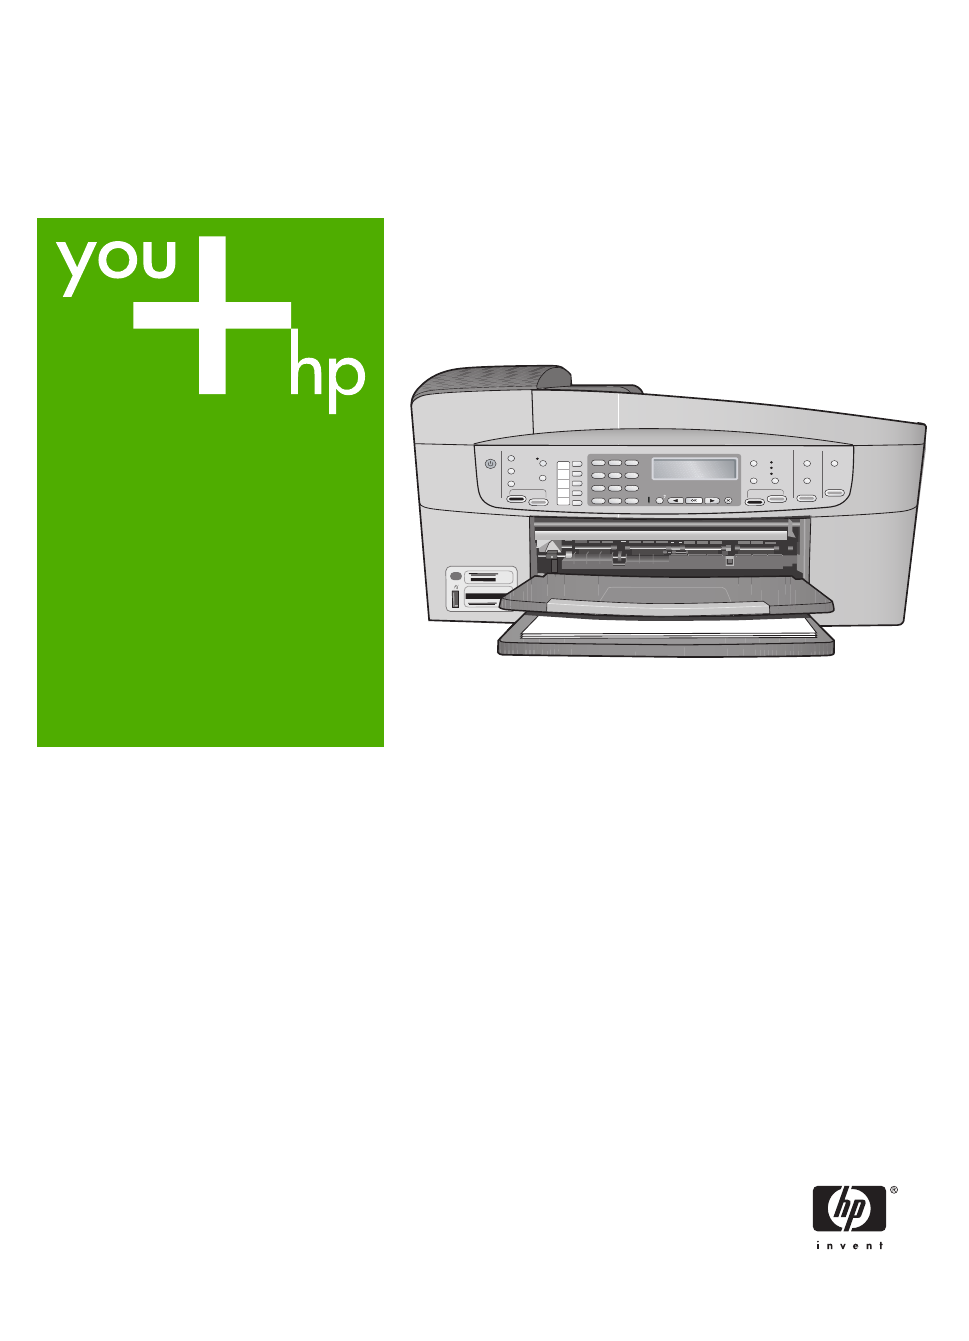 Hp Officejet 7410 All-in-one User Manual